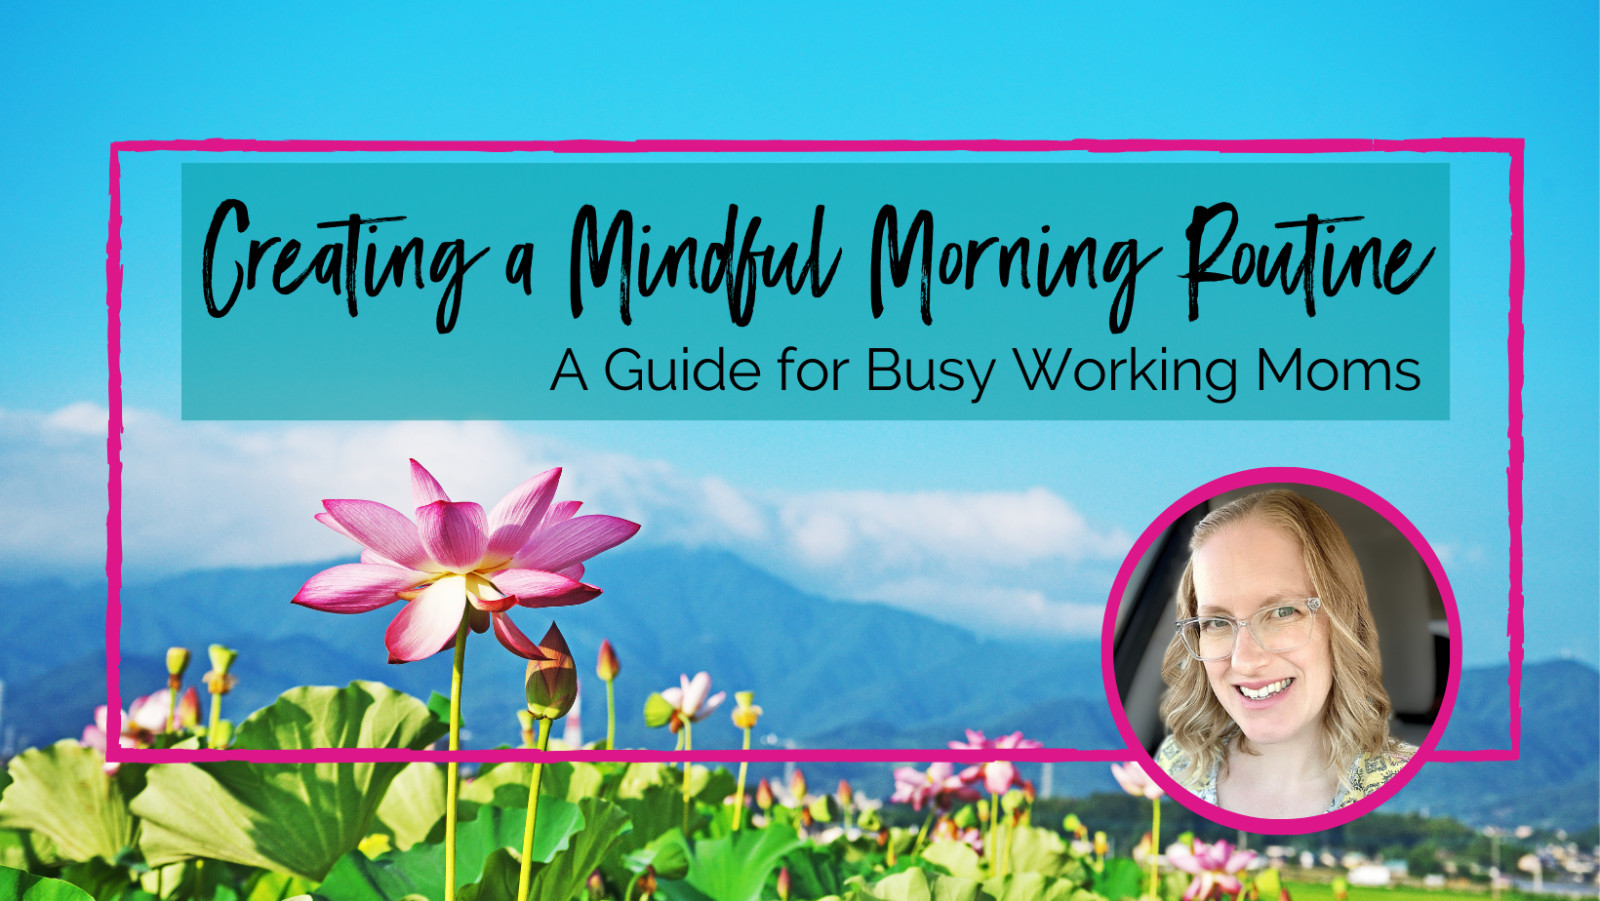 Creating a Mindful Morning Routine: A Guide for Busy Working Moms